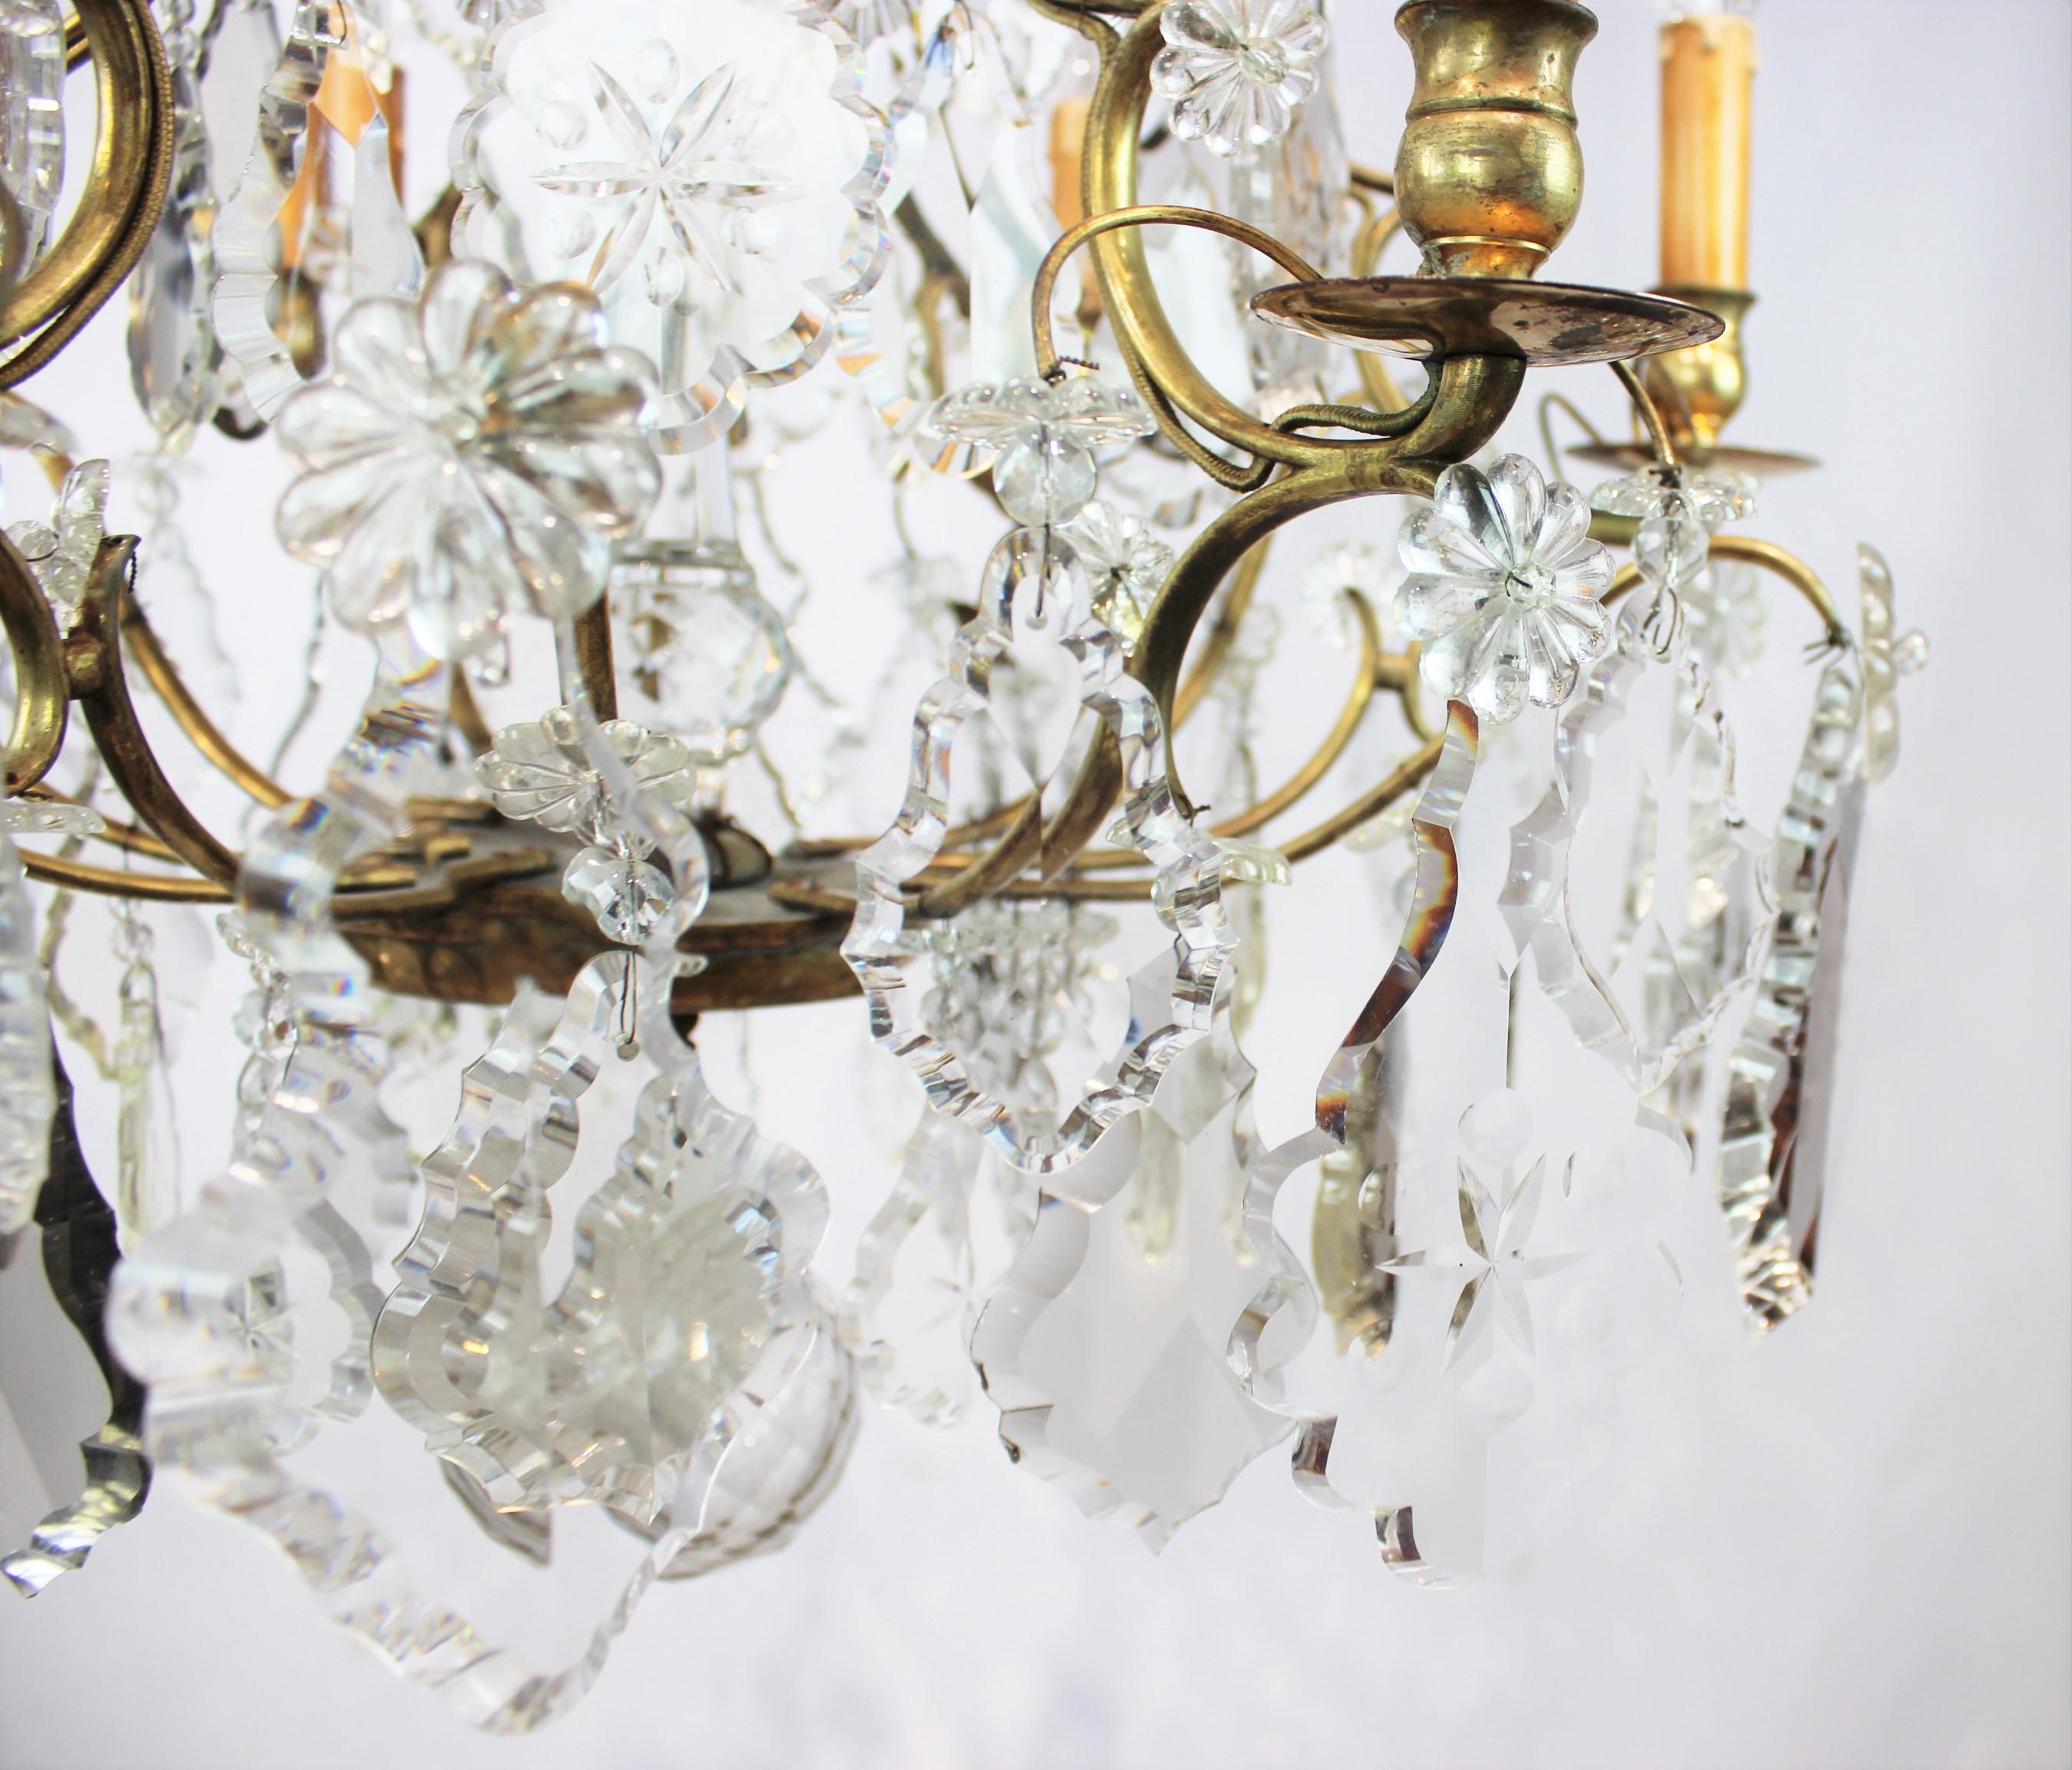 Chandelier of brass and polished prisms from France, circa 1920s. The chandelier is in great antique condition.